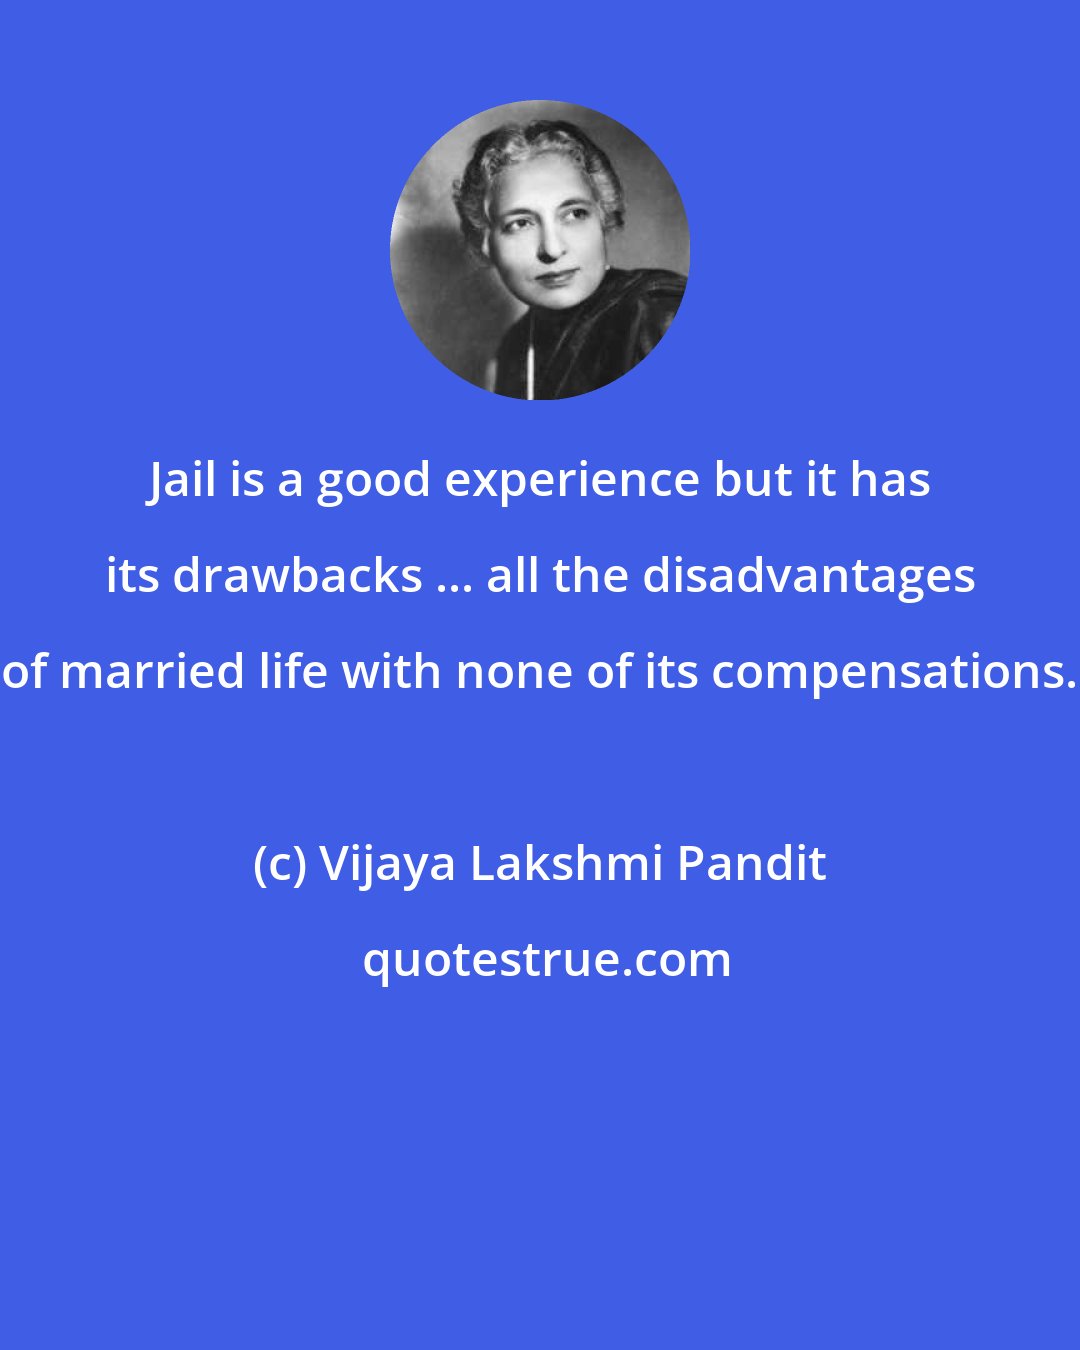 Vijaya Lakshmi Pandit: Jail is a good experience but it has its drawbacks ... all the disadvantages of married life with none of its compensations.